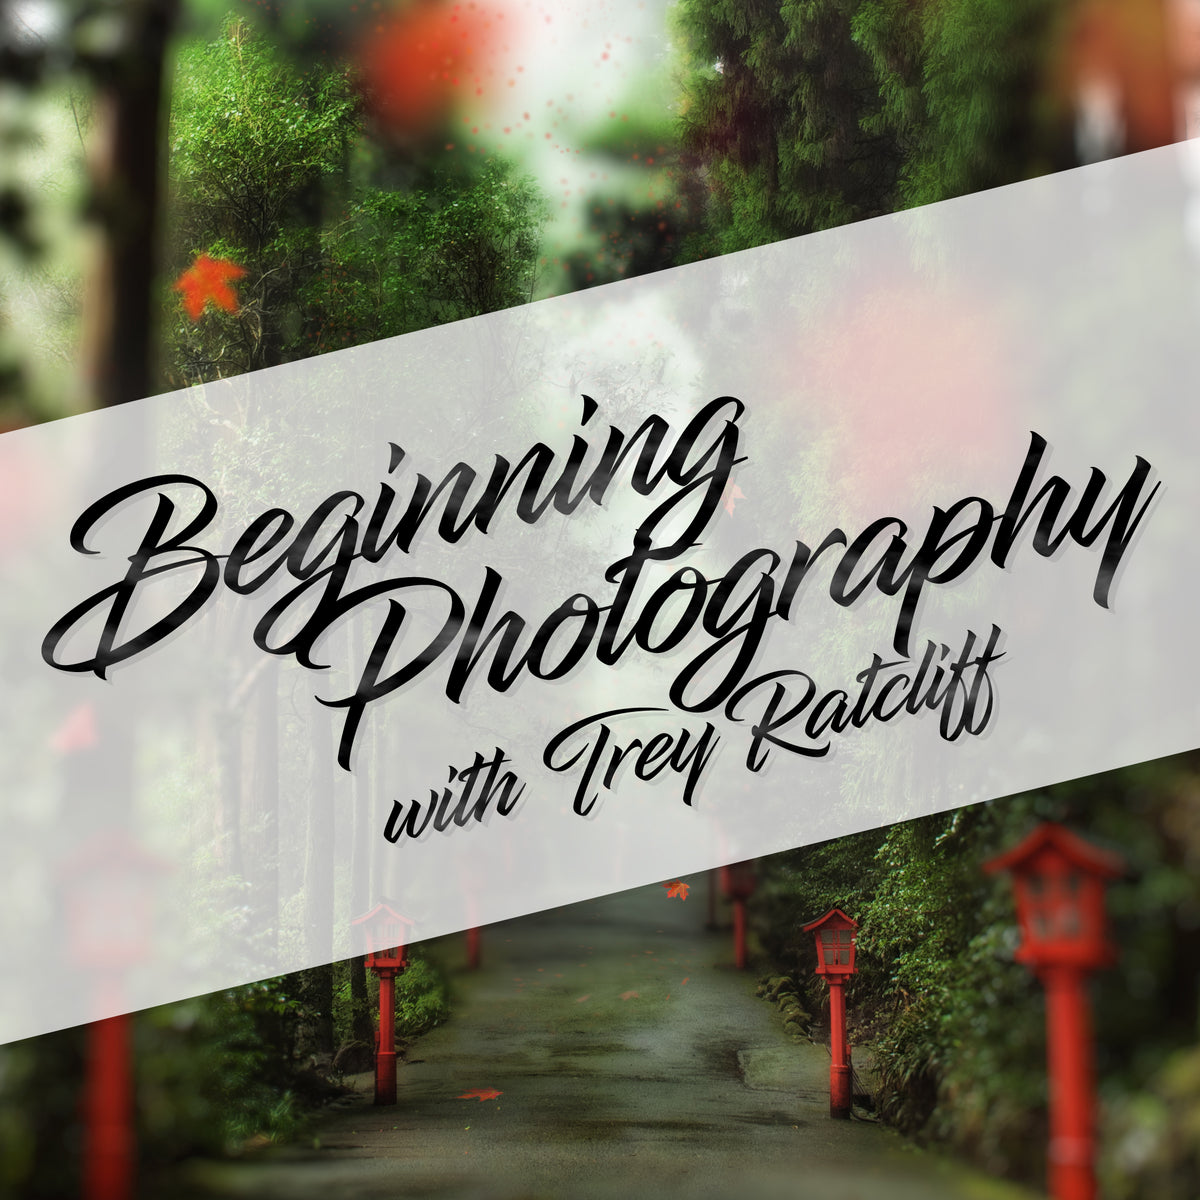 Beginning Photography with Trey Ratcliff